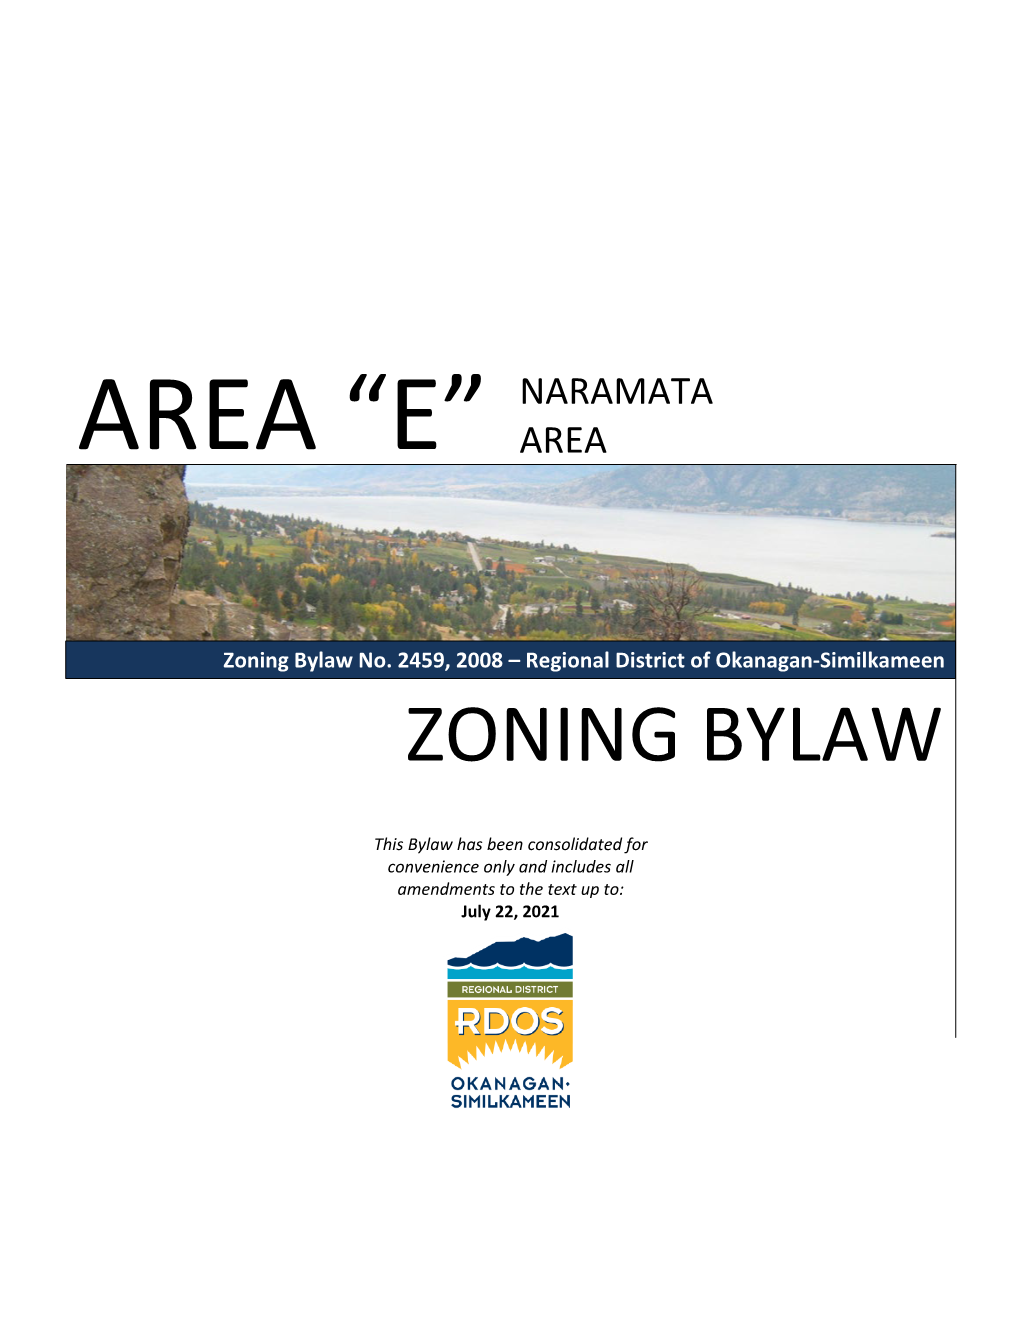 Electoral Area "E" Zoning Bylaw No. 2459, 2008